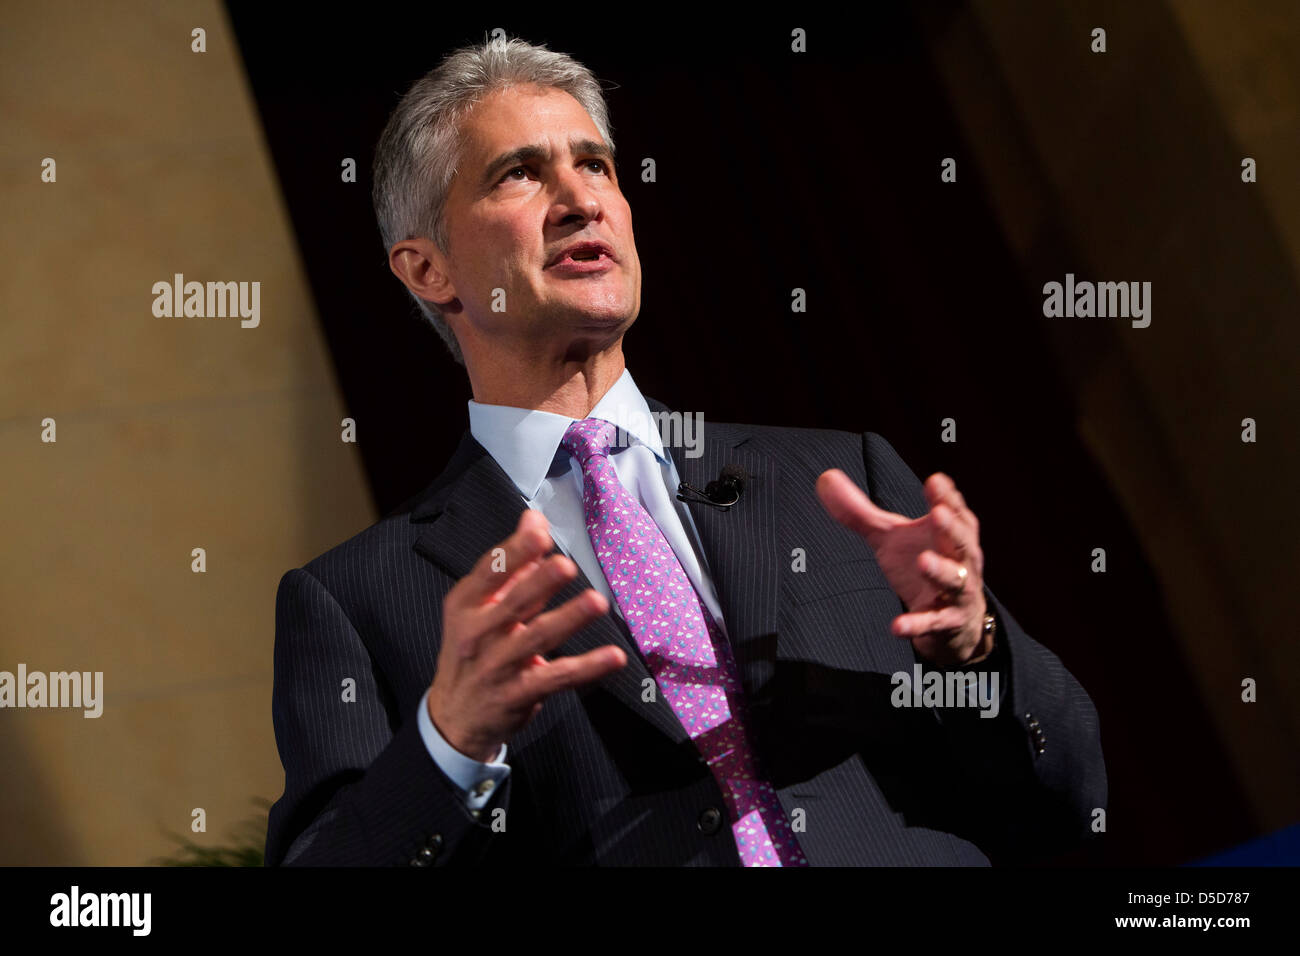 Jeffery A. Smisek, Chairman, President und Chief Executive Officer (CEO) von United Continental Holdings, Inc. Stockfoto